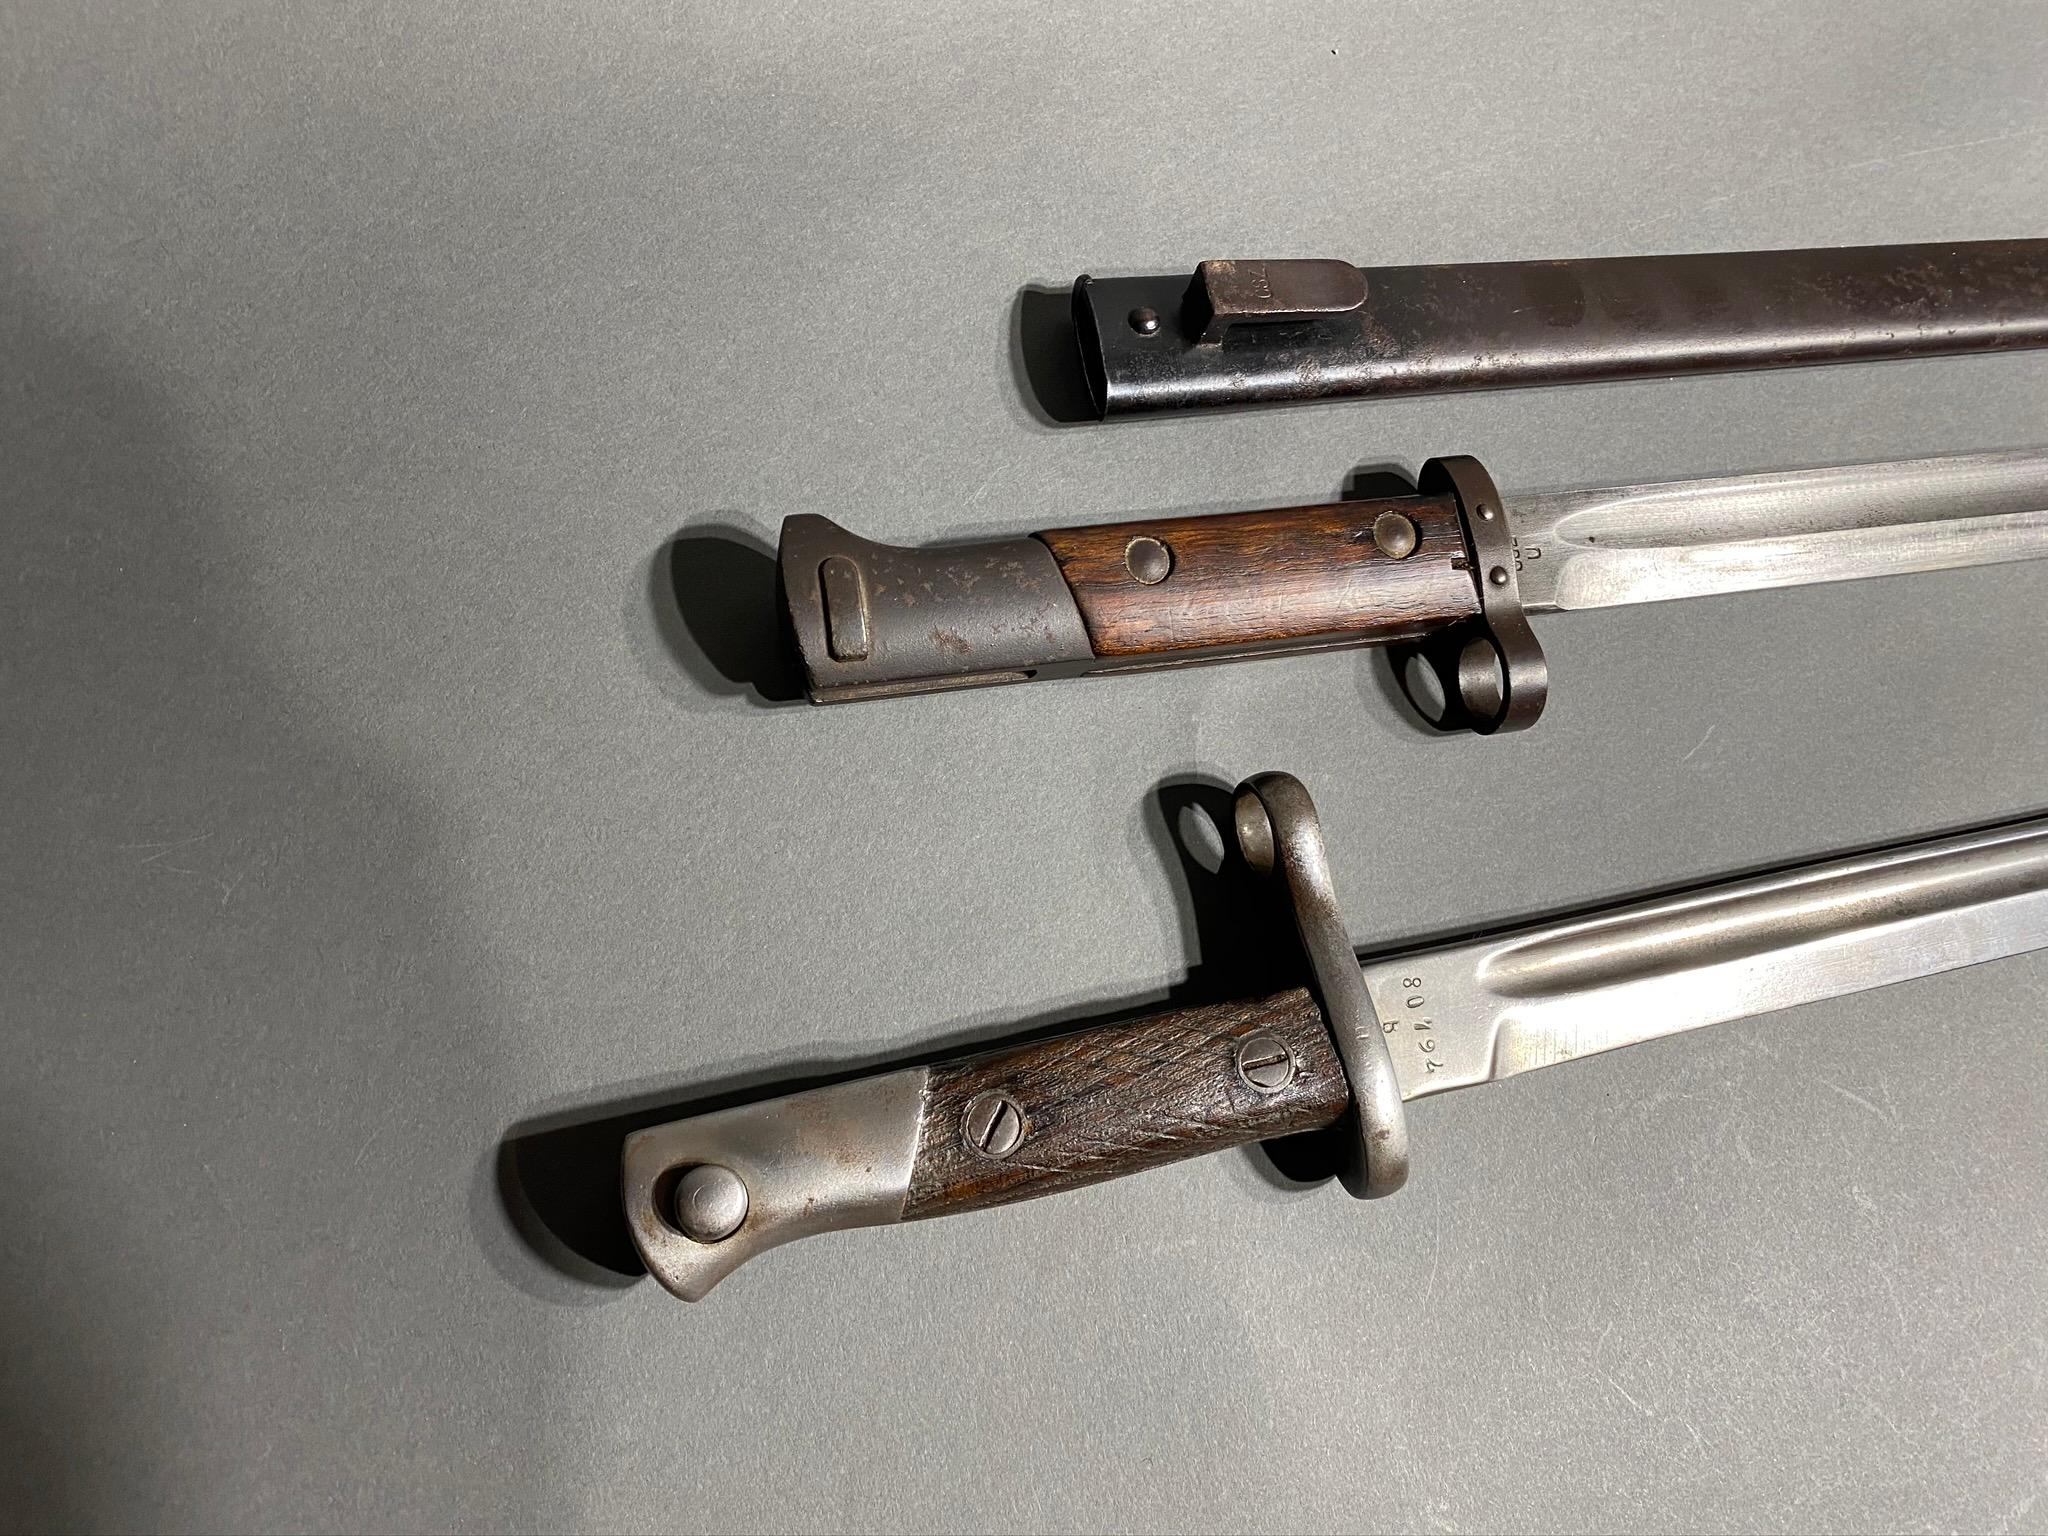 Pair of Bayonets, one with scabbard